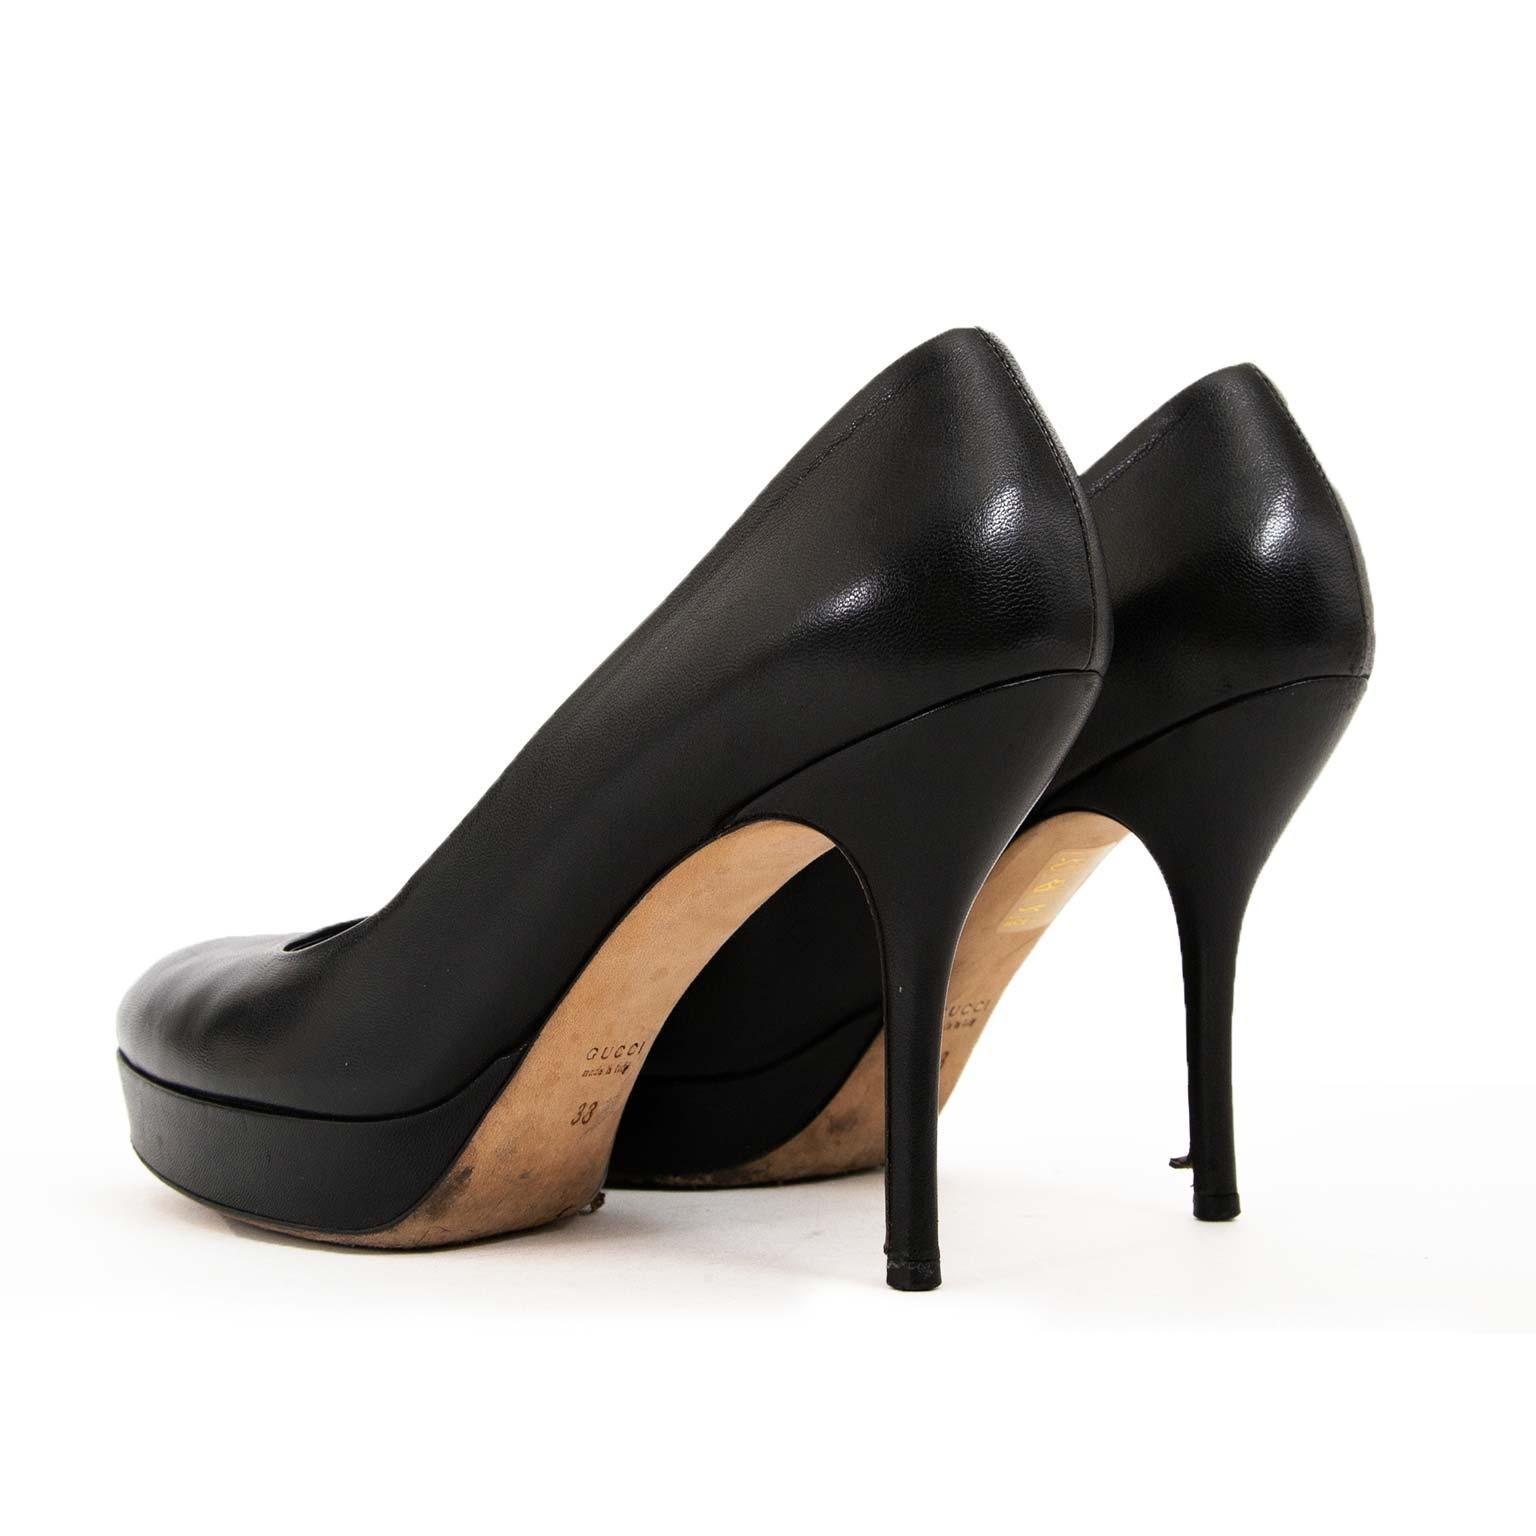 Good preloved condition

Gucci Black Leather Pumps - Size 38

Every woman needs black Gucci pumps in her closet. 
This pair of shoes is crafted in black leather and features a heel hight of 9 cm.
The platform sole makes it easy to walk on these